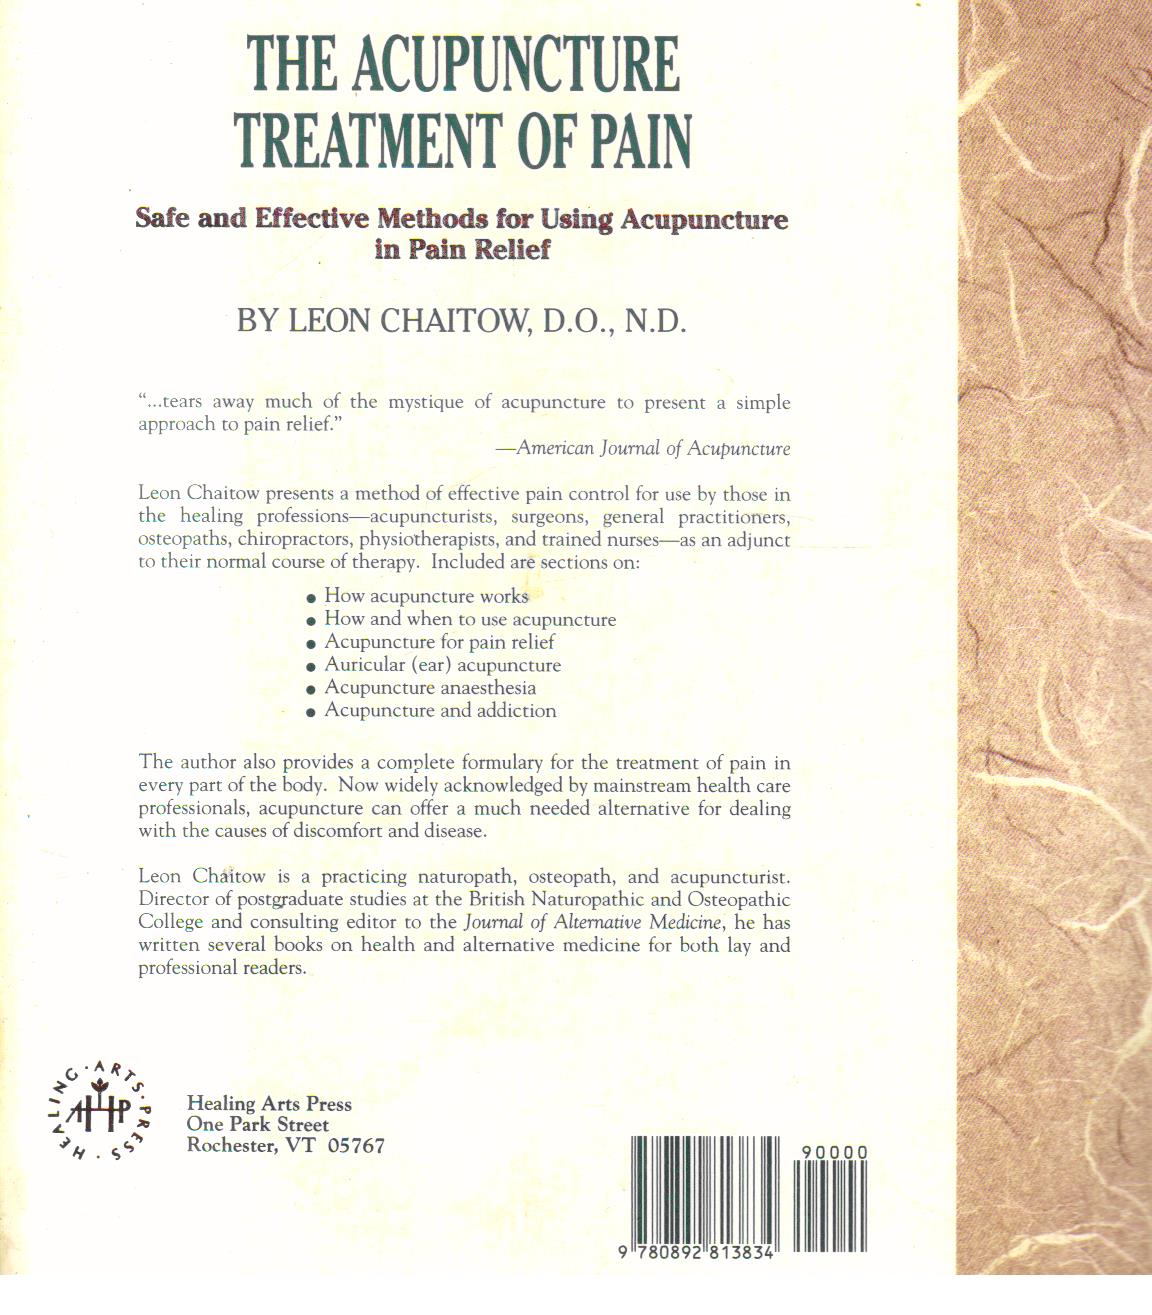 The Acupuncture Treatment of Pain.